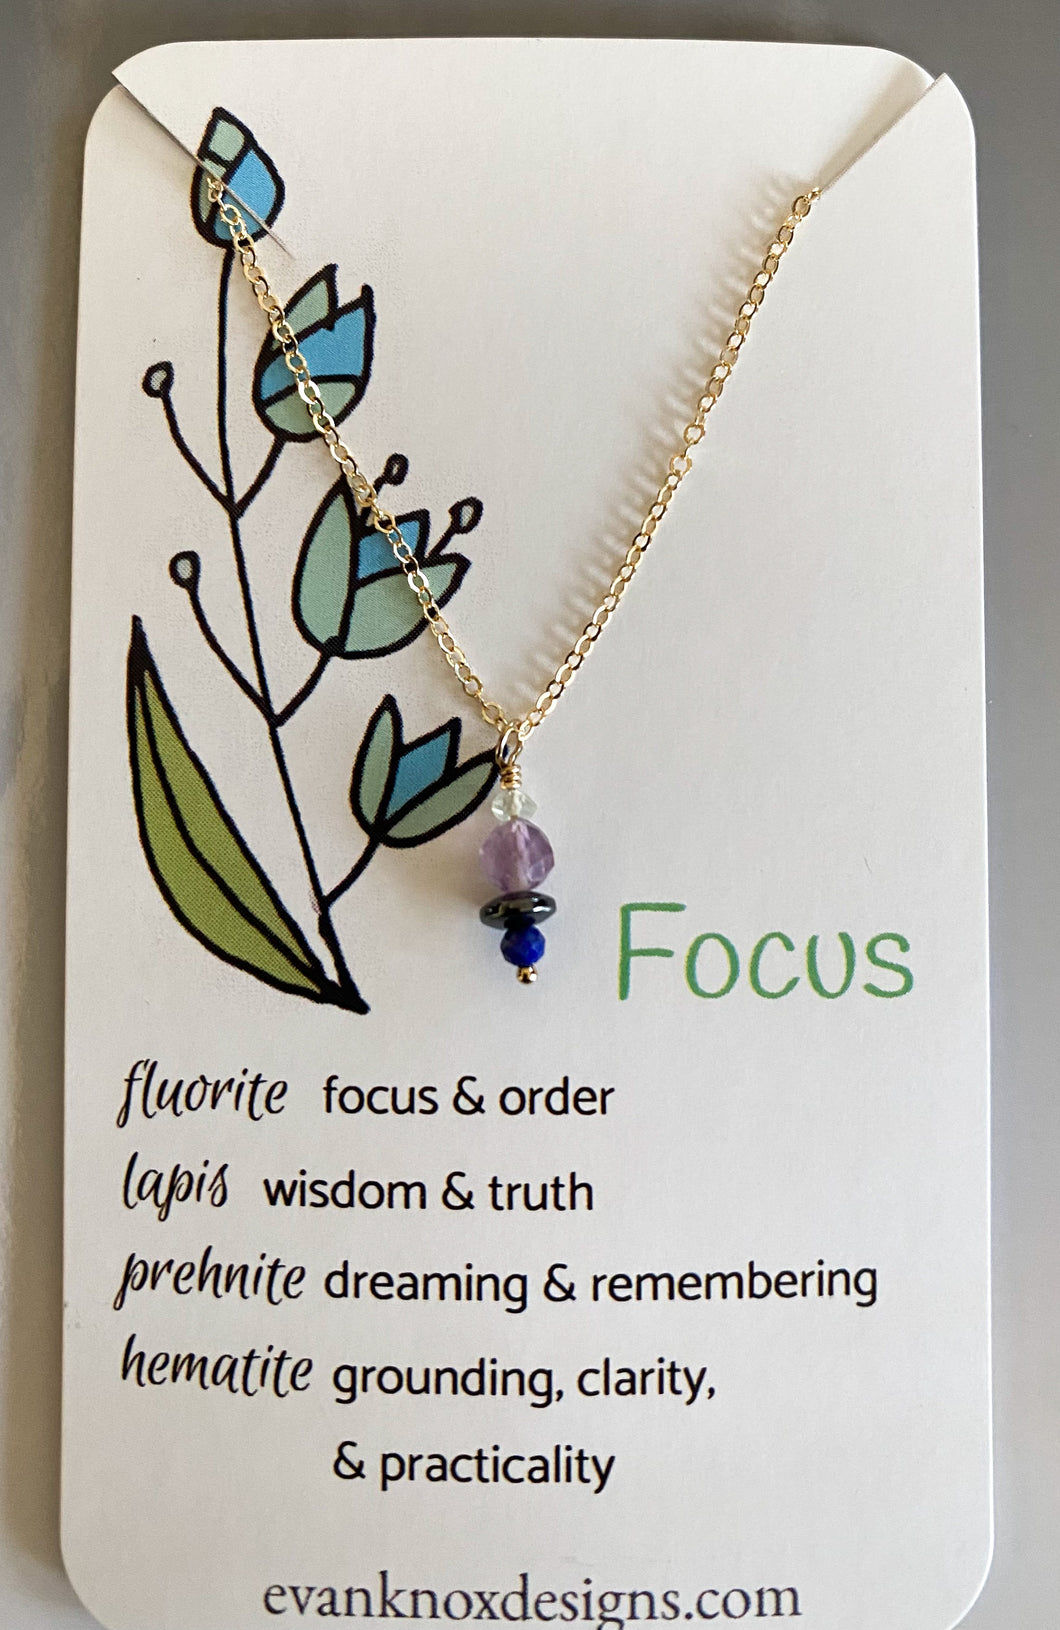 Focus necklace in gold